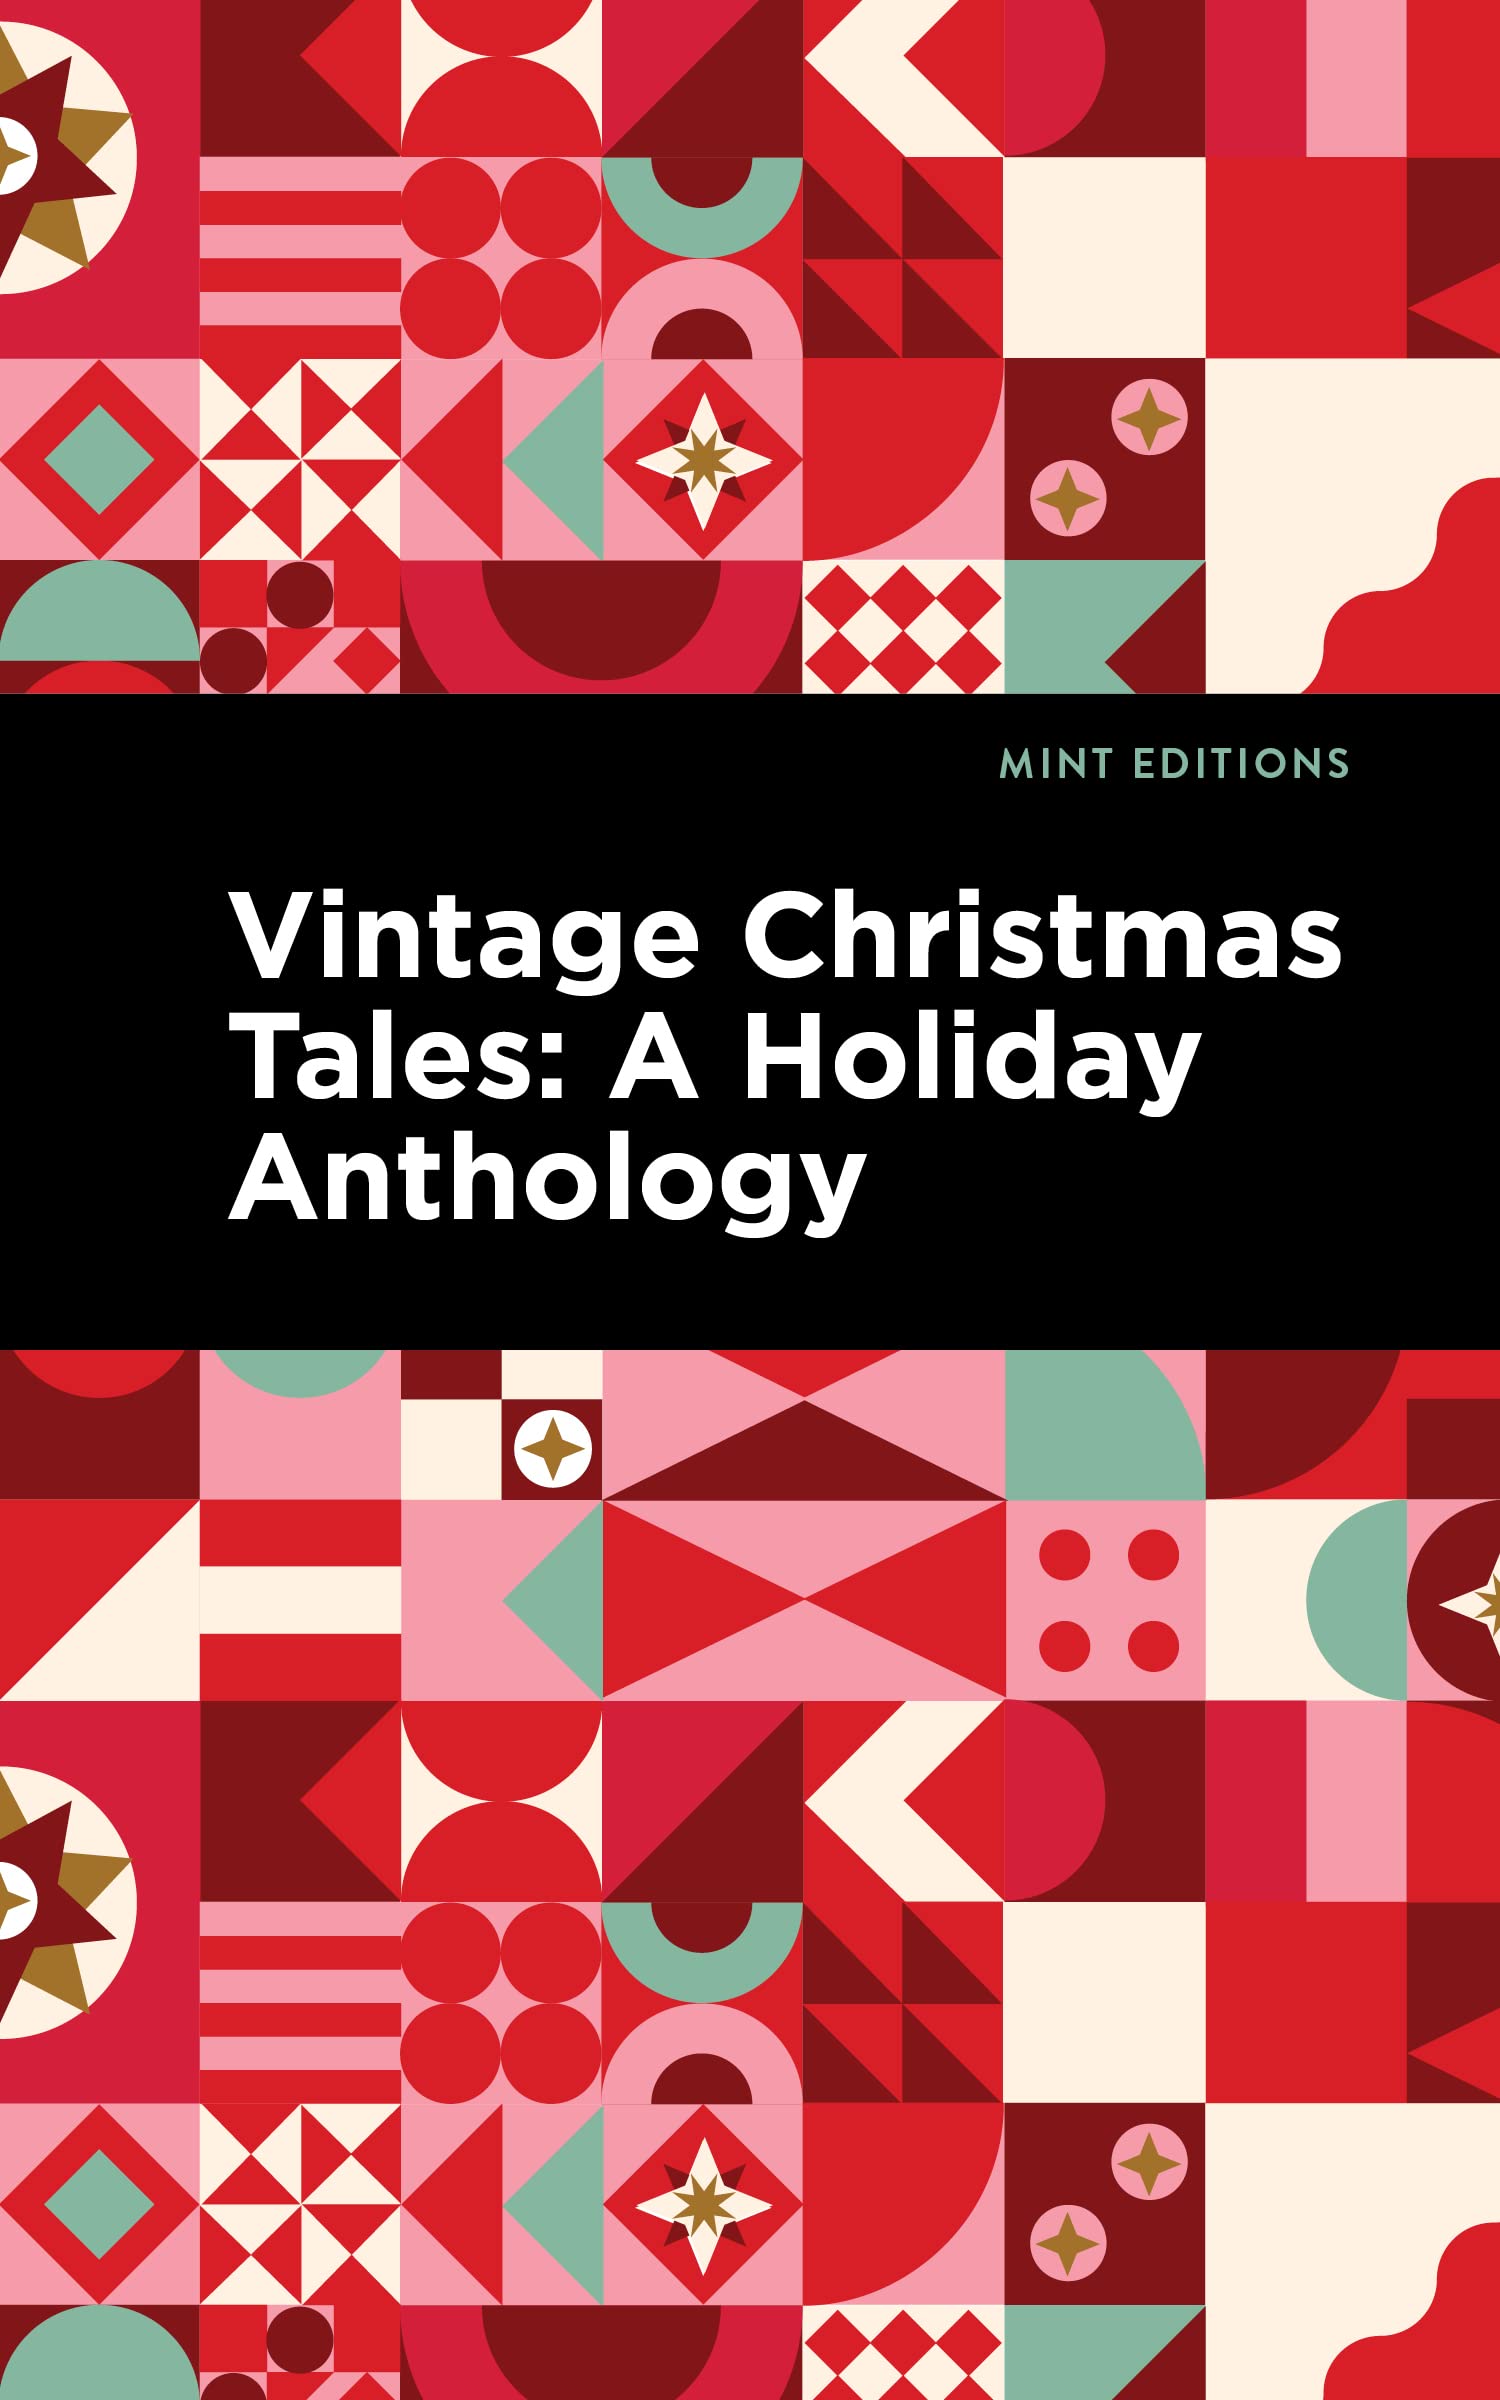 Vintage Christmas Tales: A Holiday Anthology (Mint Editions (Christmas Collection))